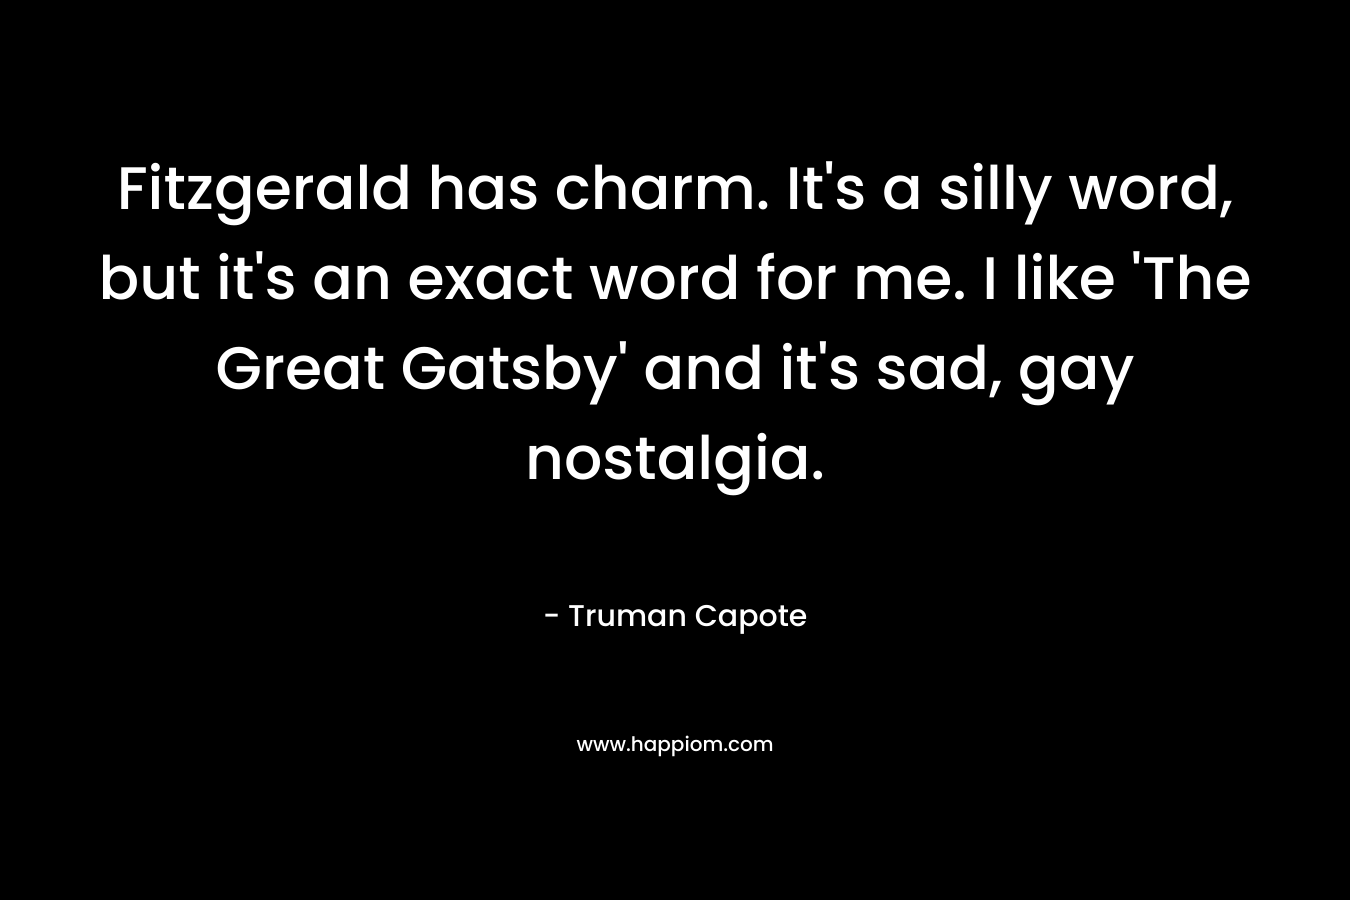 Fitzgerald has charm. It's a silly word, but it's an exact word for me. I like 'The Great Gatsby' and it's sad, gay nostalgia.